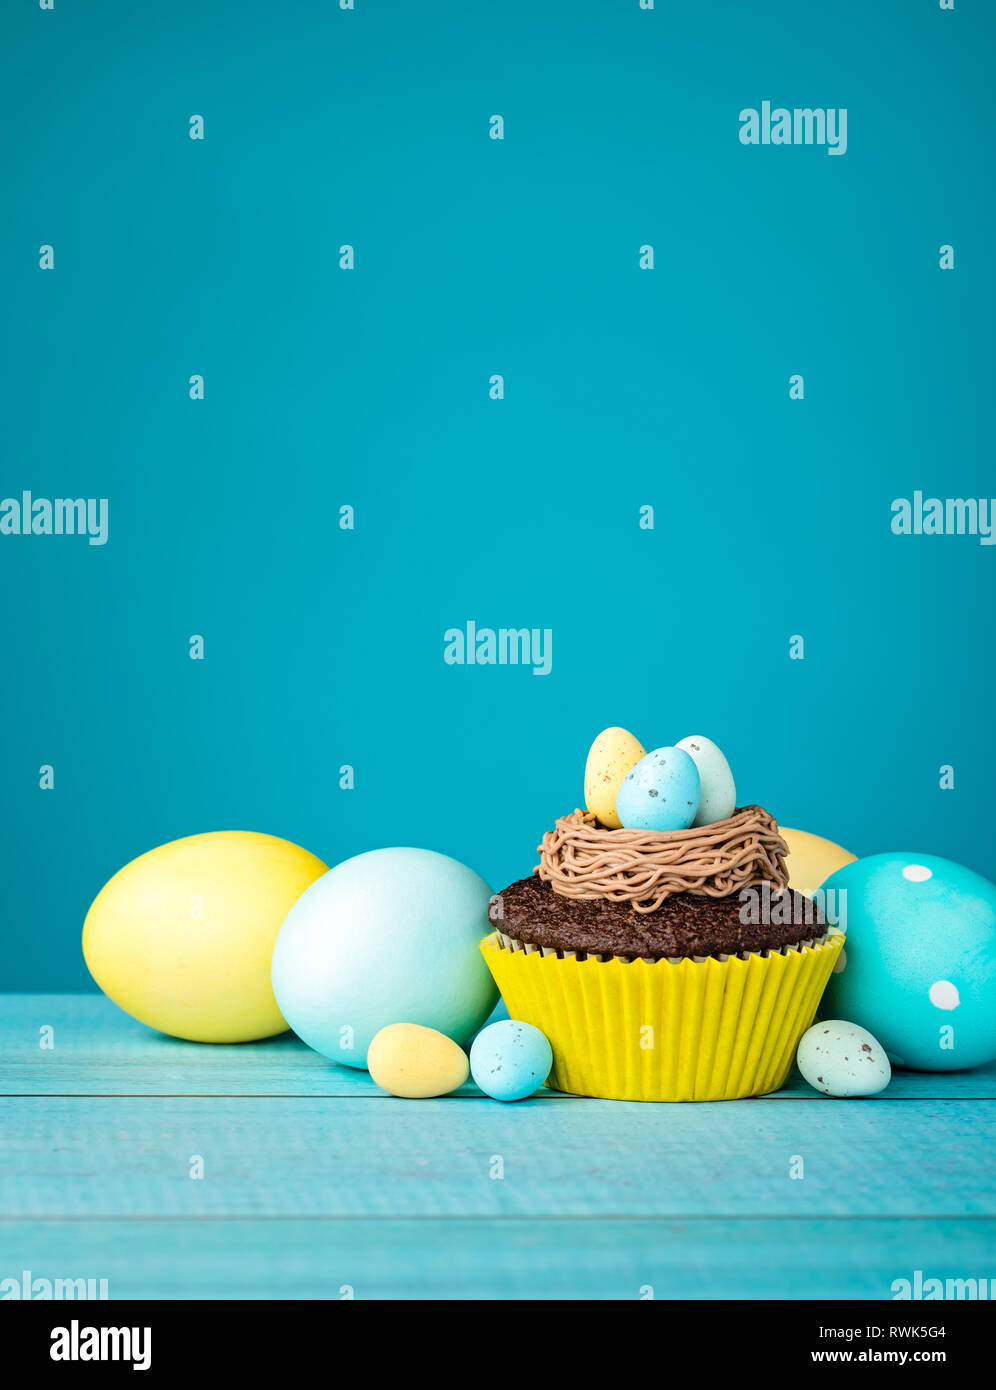 Easter Eggs and cupcake with Candy on a blue background. Stock Photo